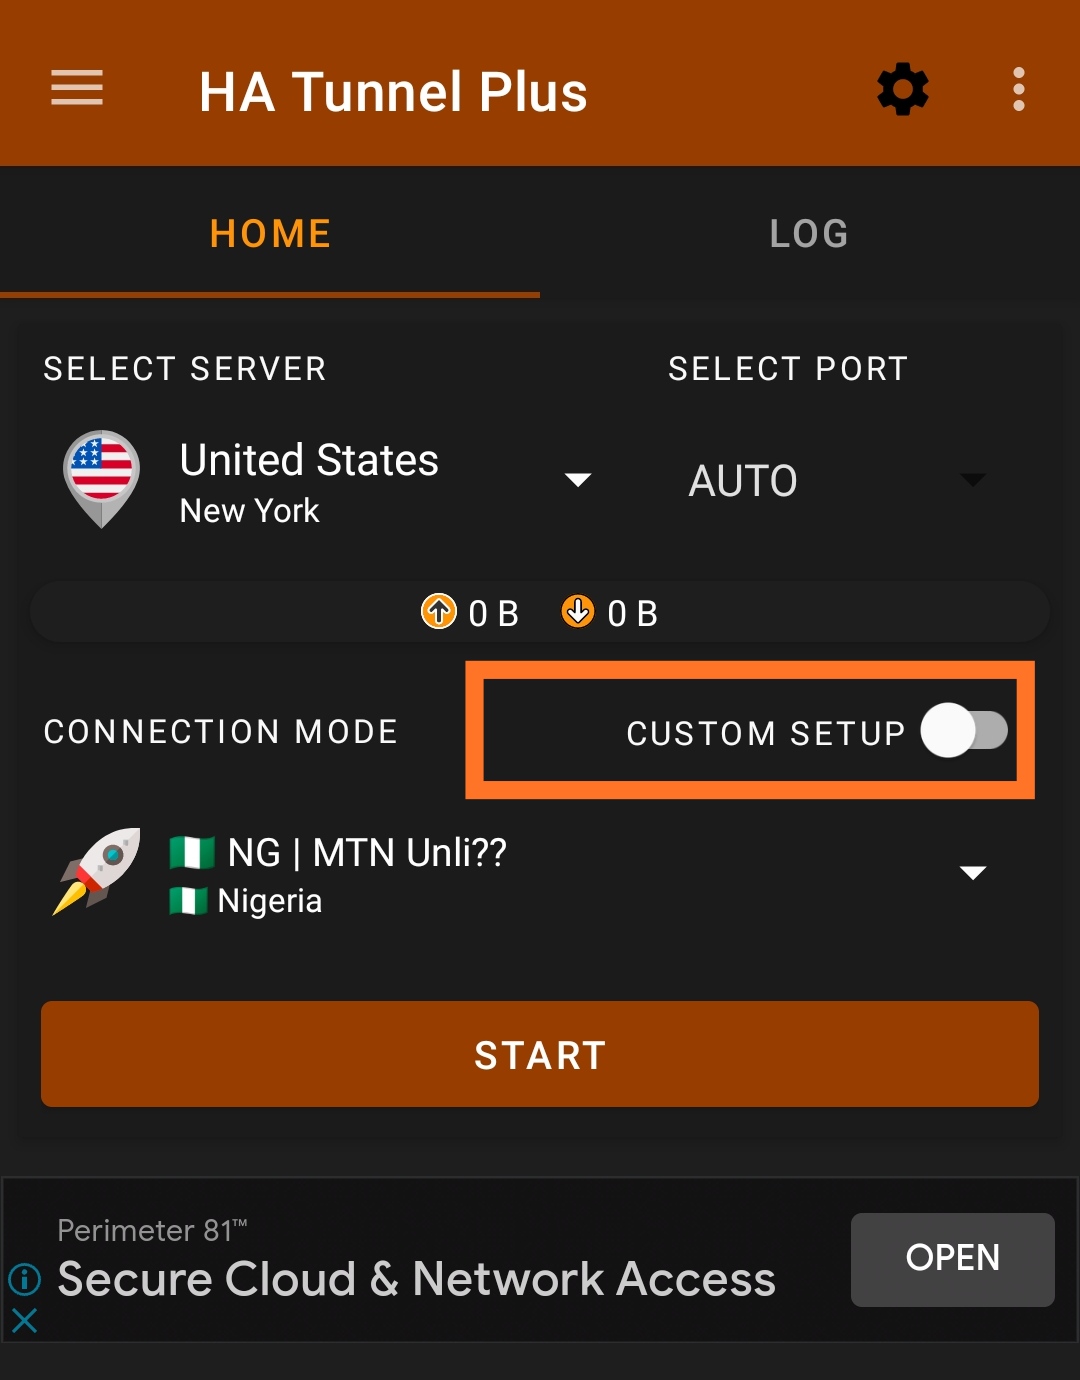 Mtn unlimited free browsing cheat